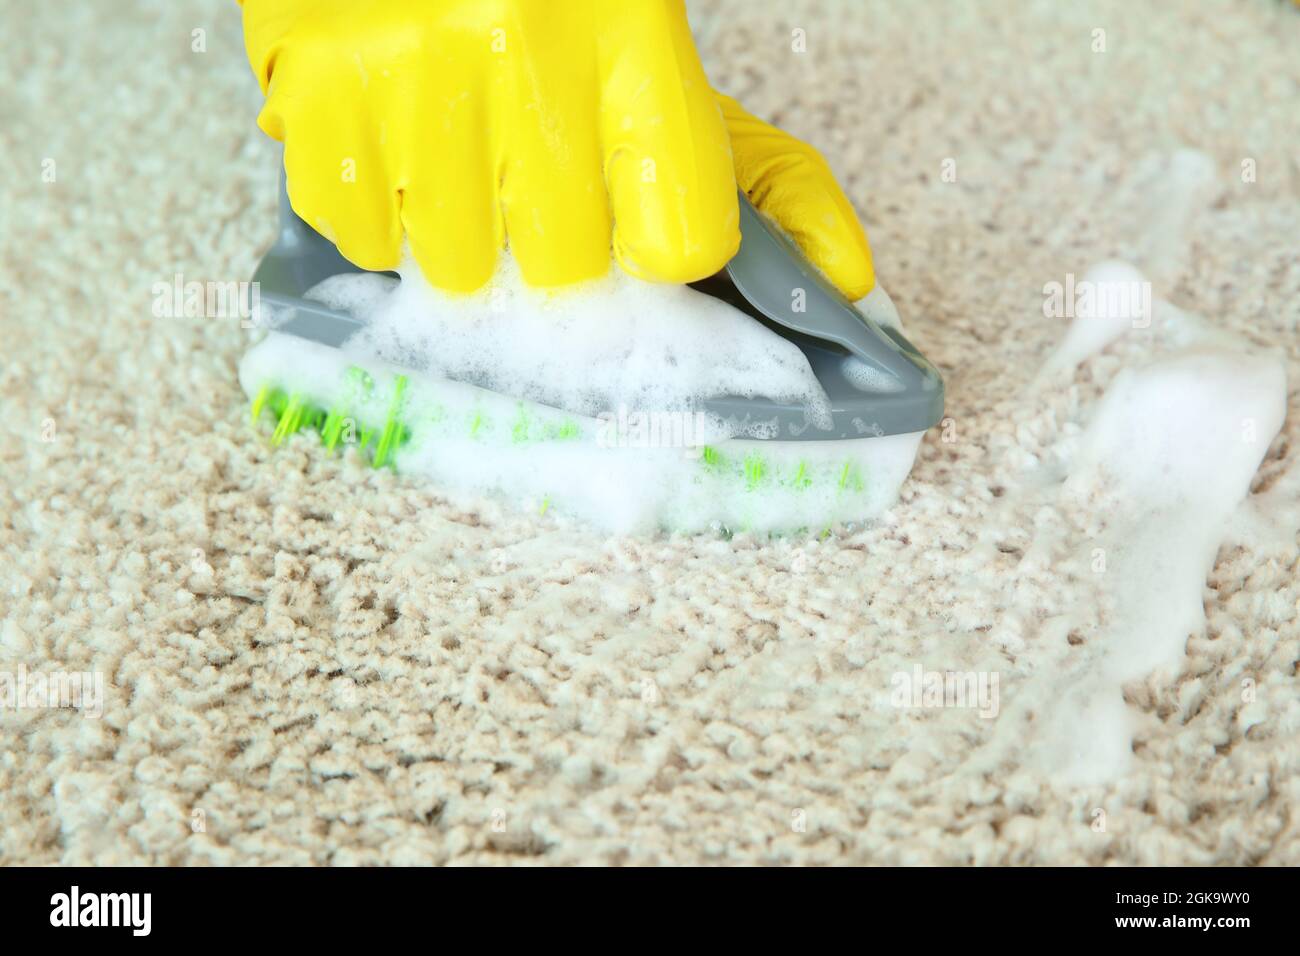 Hand in rubber glove cleaning carpet with brush and detergent